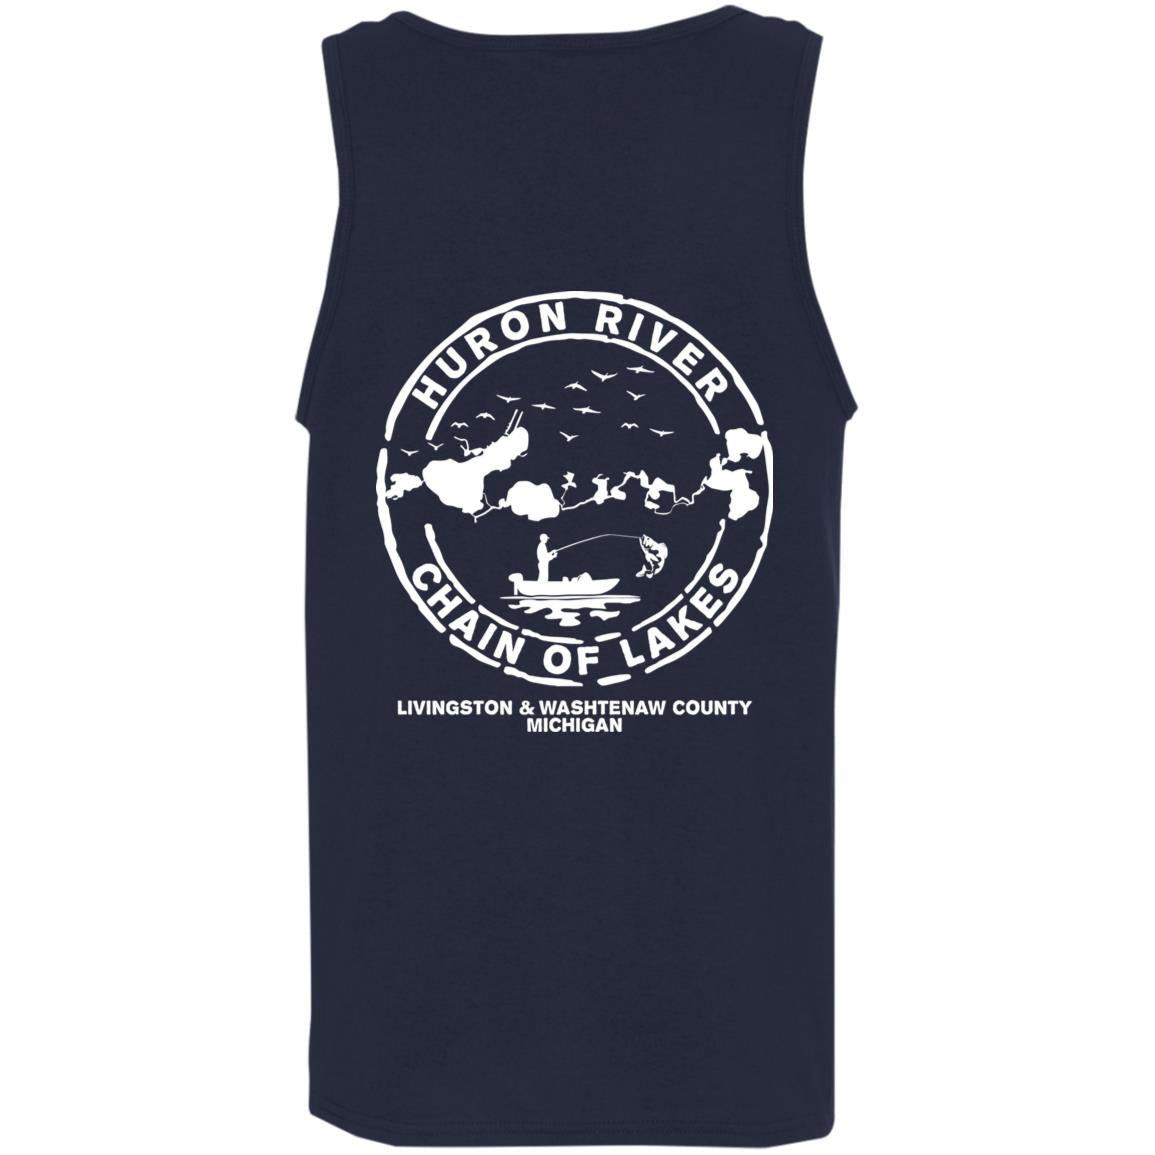 ***2 SIDED***  HRCL FL - Lets Get Nauti - 2 Sided G520 Cotton Tank Top 5.3 oz.